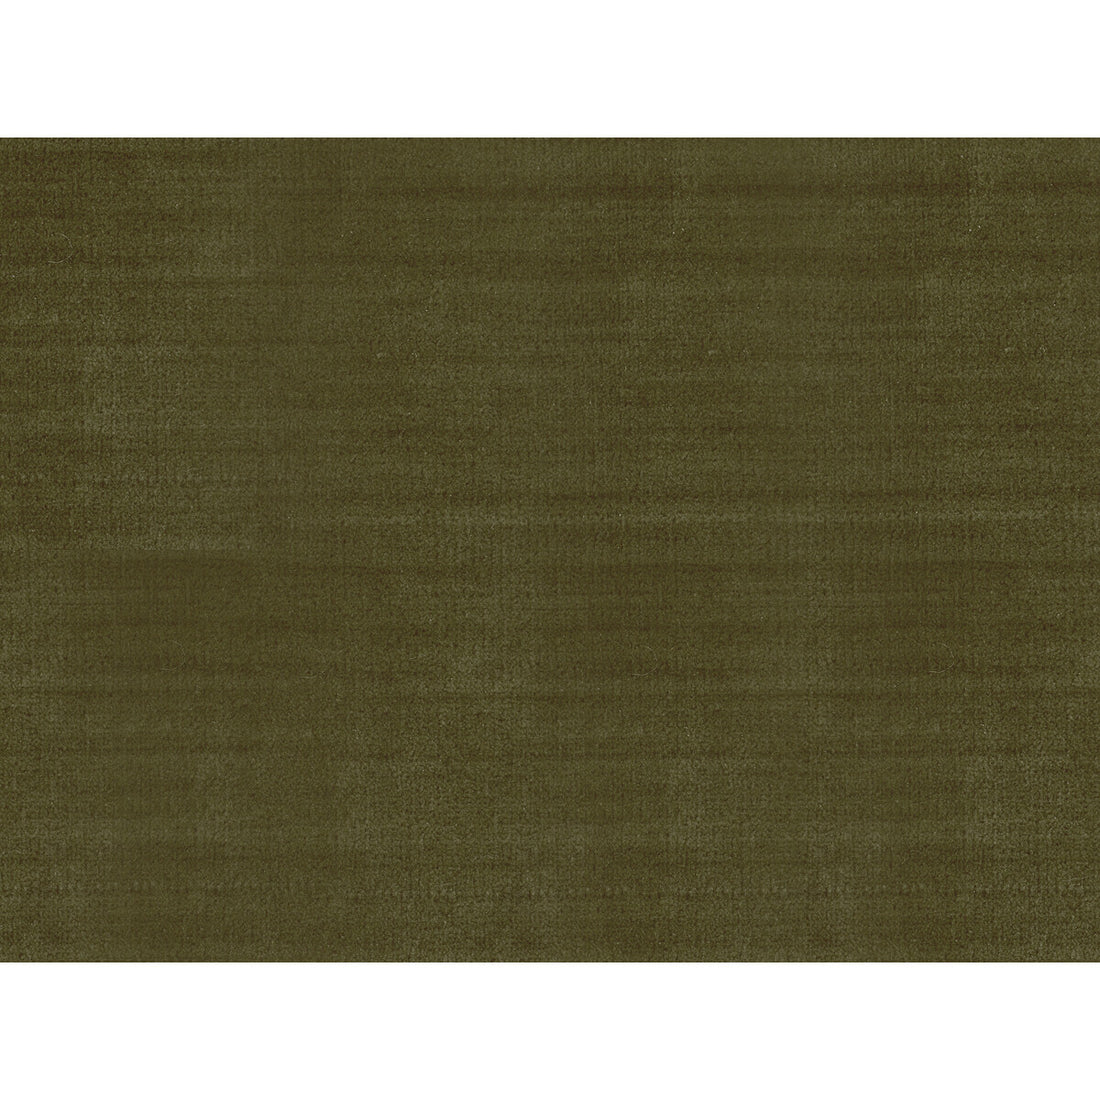 York Velvet fabric in olive color - pattern 33438.481.0 - by Kravet Couture